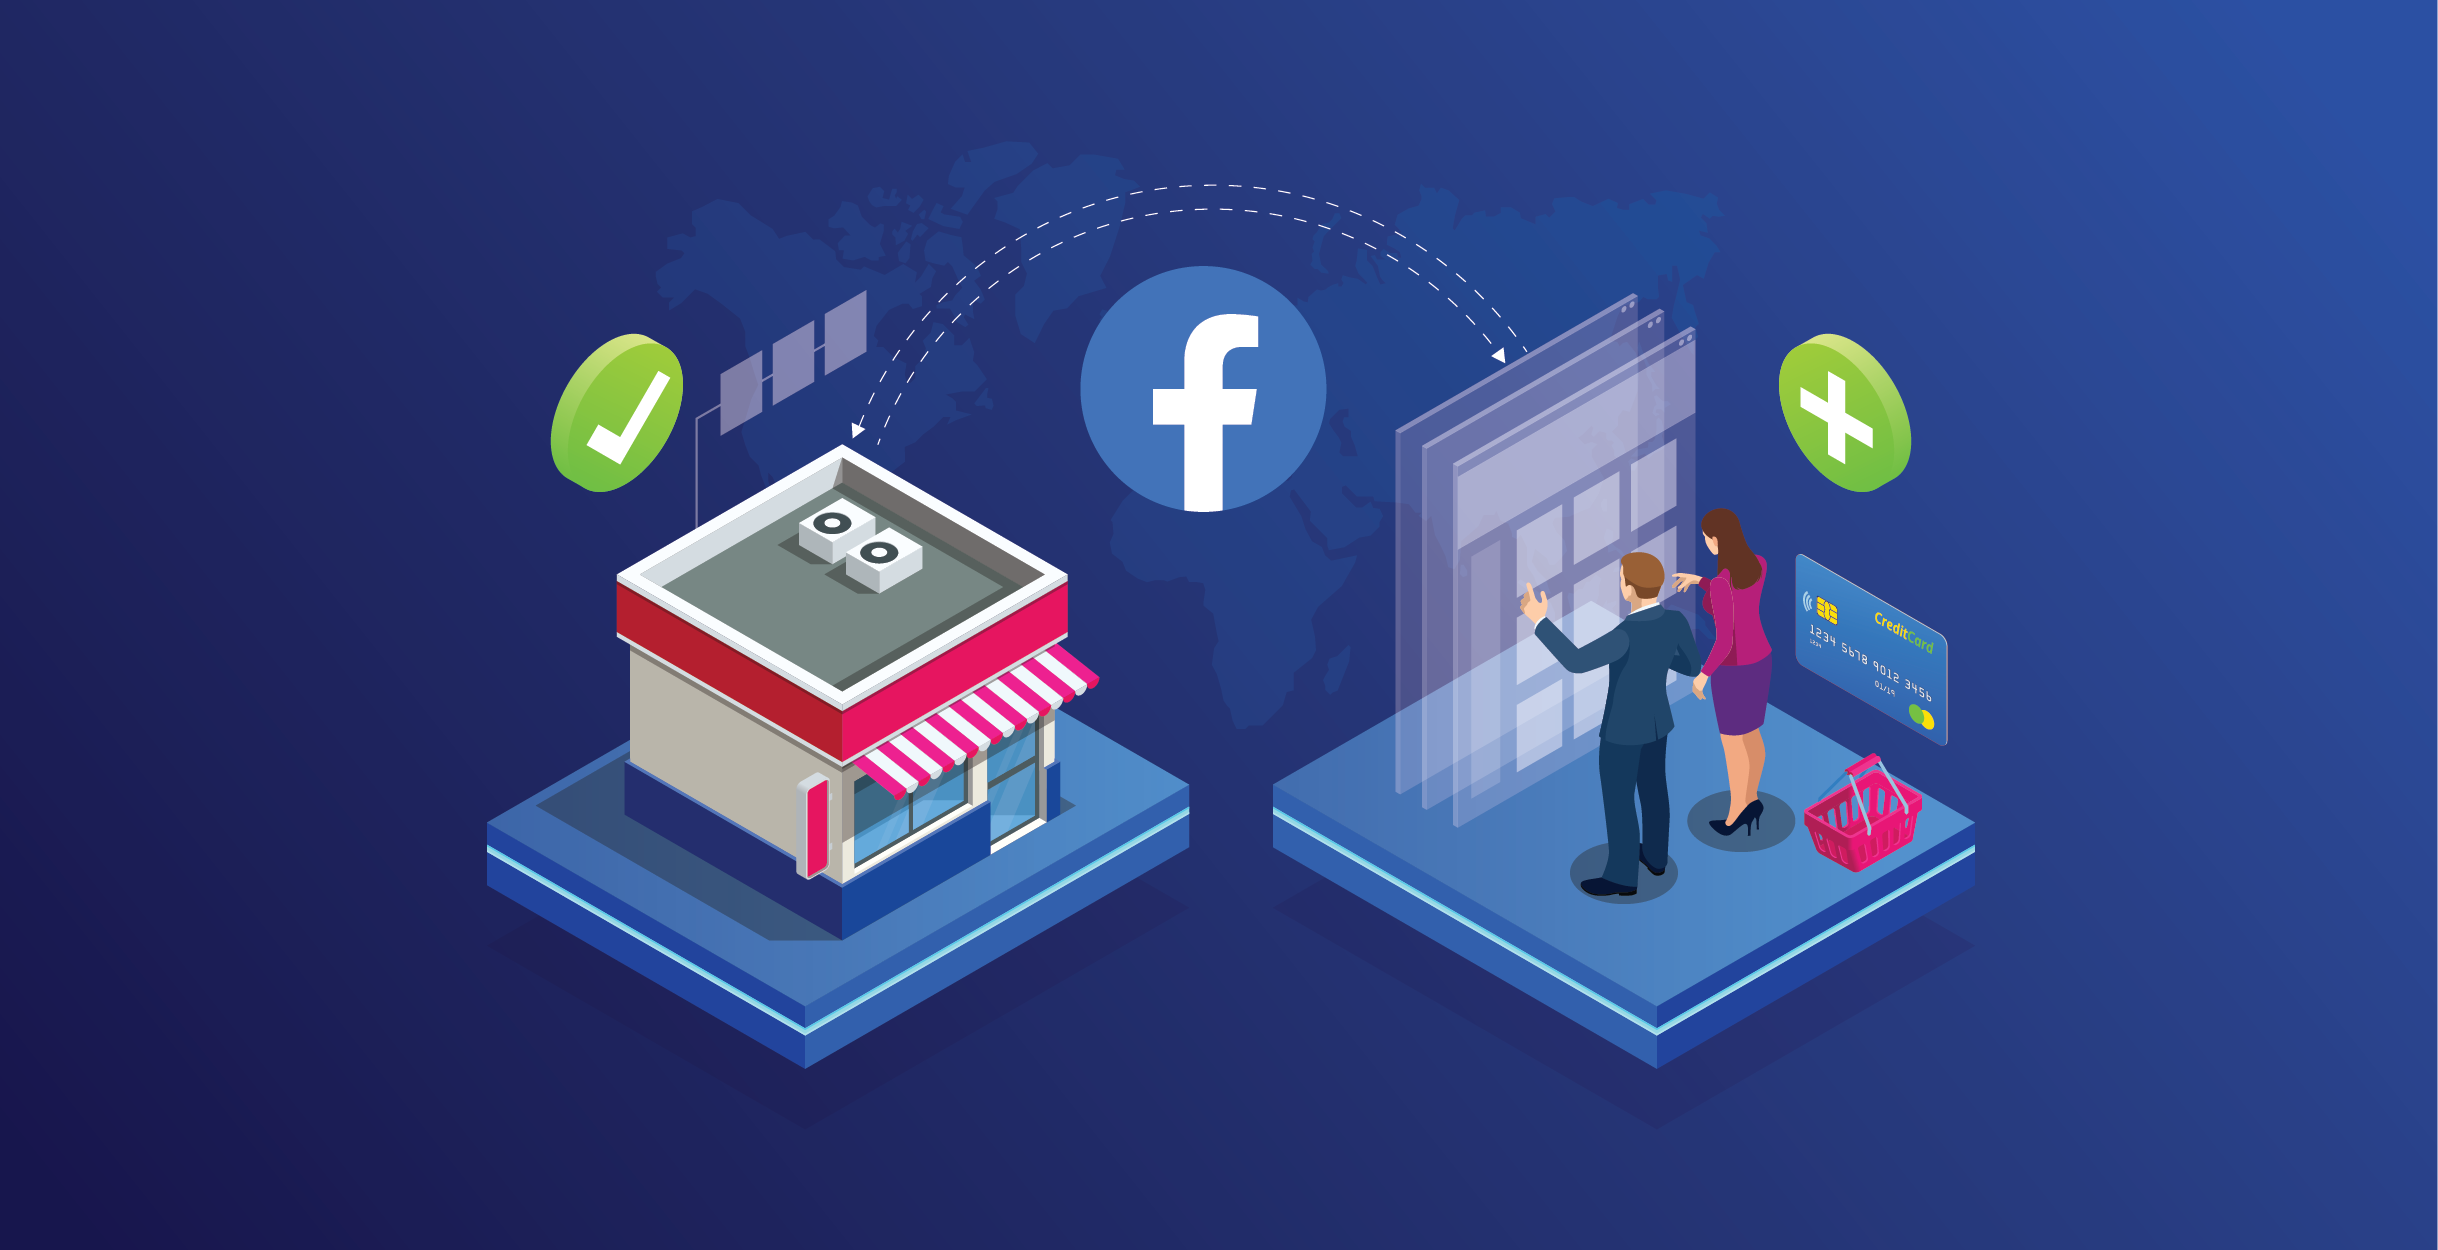 How to manage sales orders between Facebook and others?